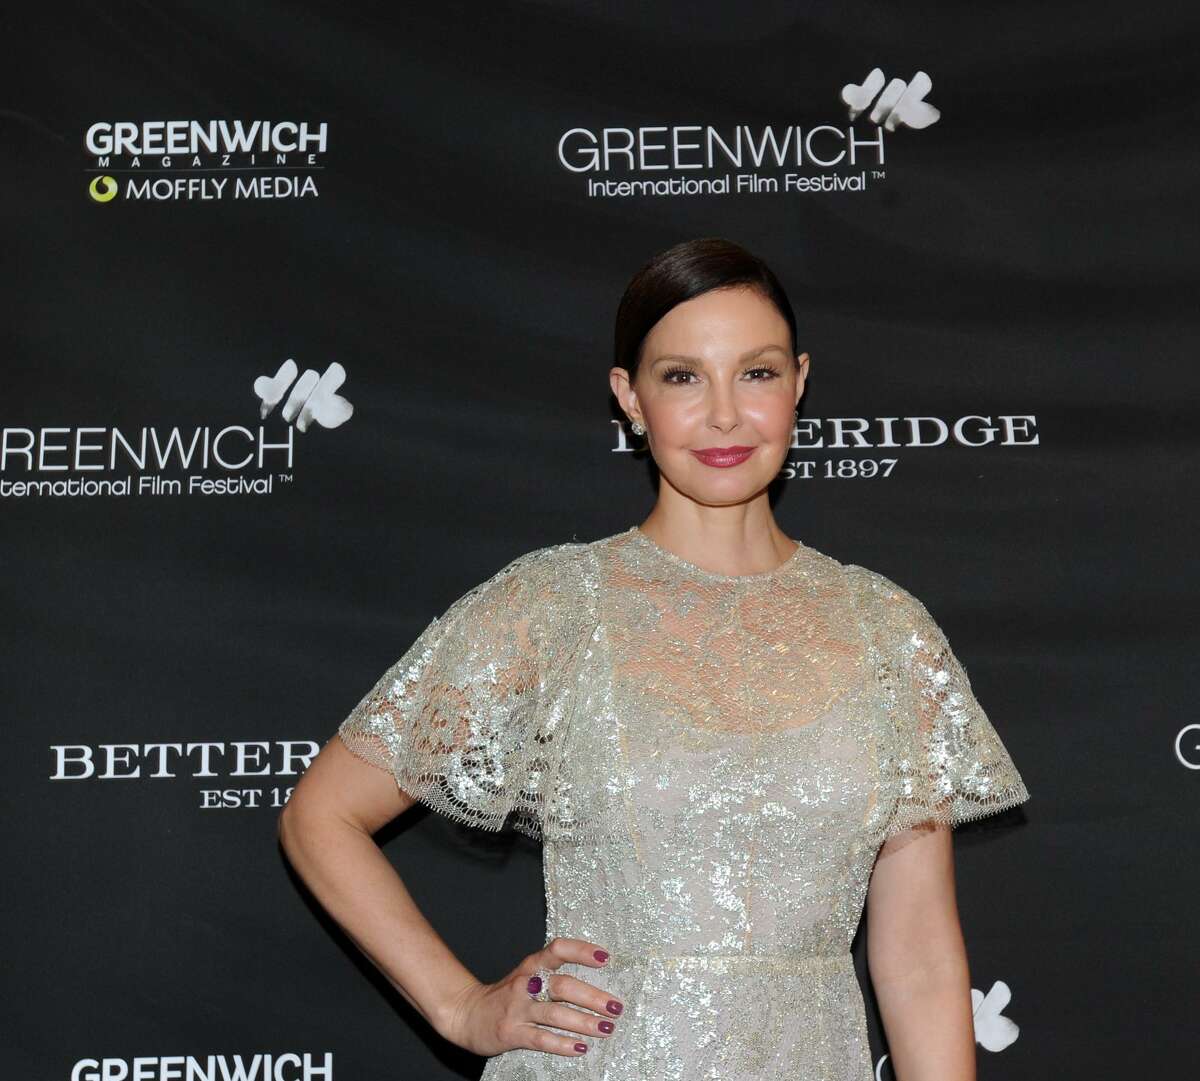 Ashley Judd during the Greenwich International Film Festival Changemaker Gala at Betteridge Jewelers in Greenwich, Conn., Thursday, May 31, 2018. The gala honored actress and activist honoring Judd. The 2019 gala will honor actress Eva Longoria Baston and Greenwich’s Bobby Walker Jr.